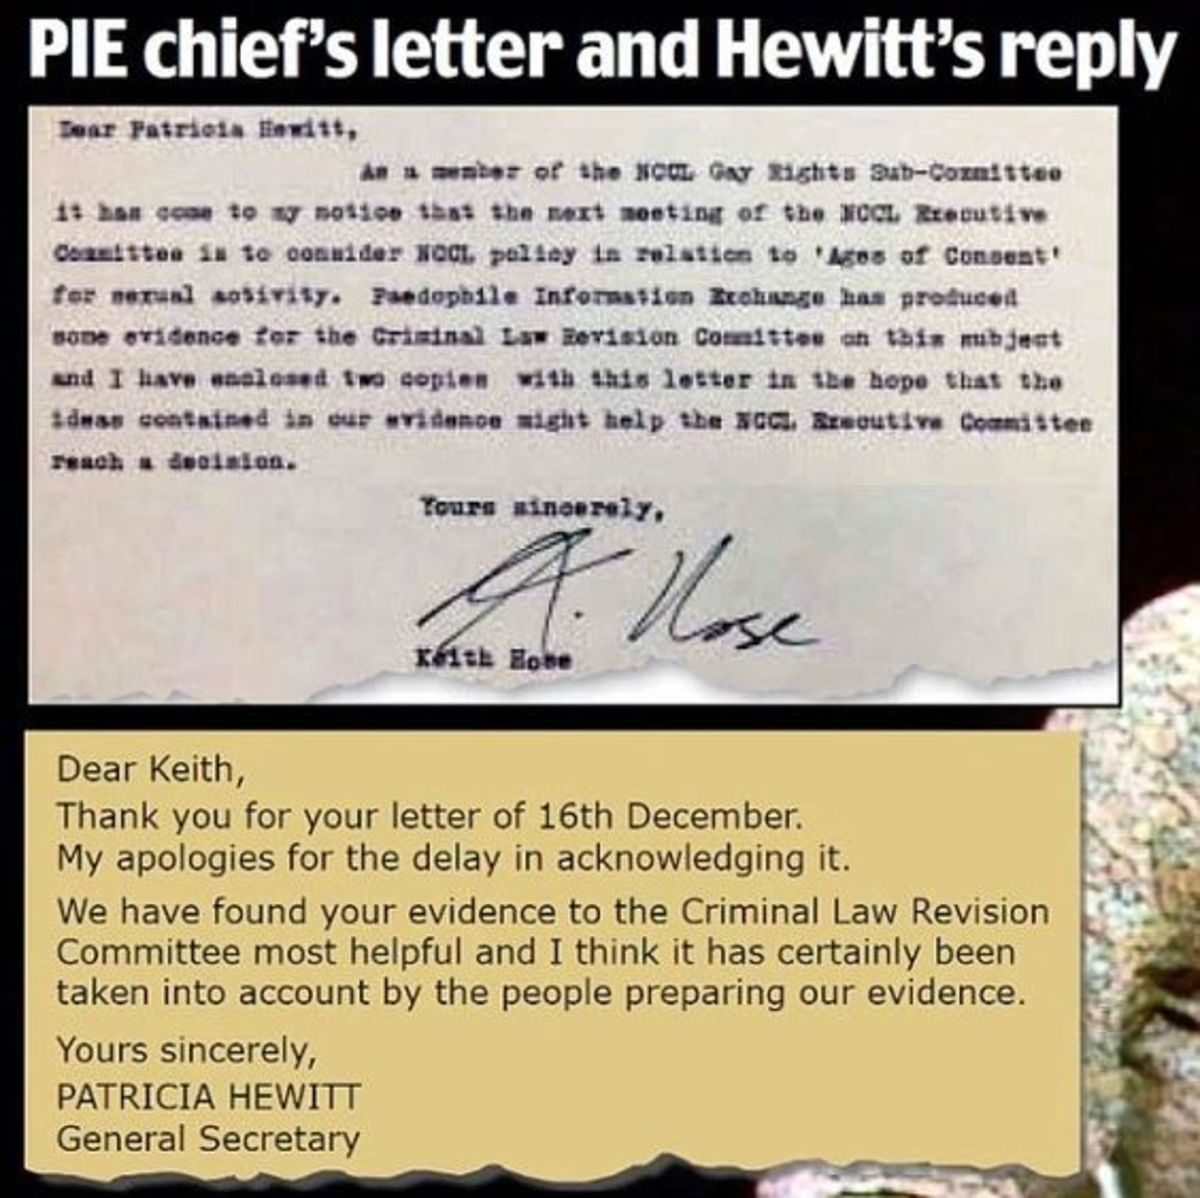 PIE received British government. Patricia Hewitt is a leading Labour MP who campaigned for PIE and removing the age of consent.